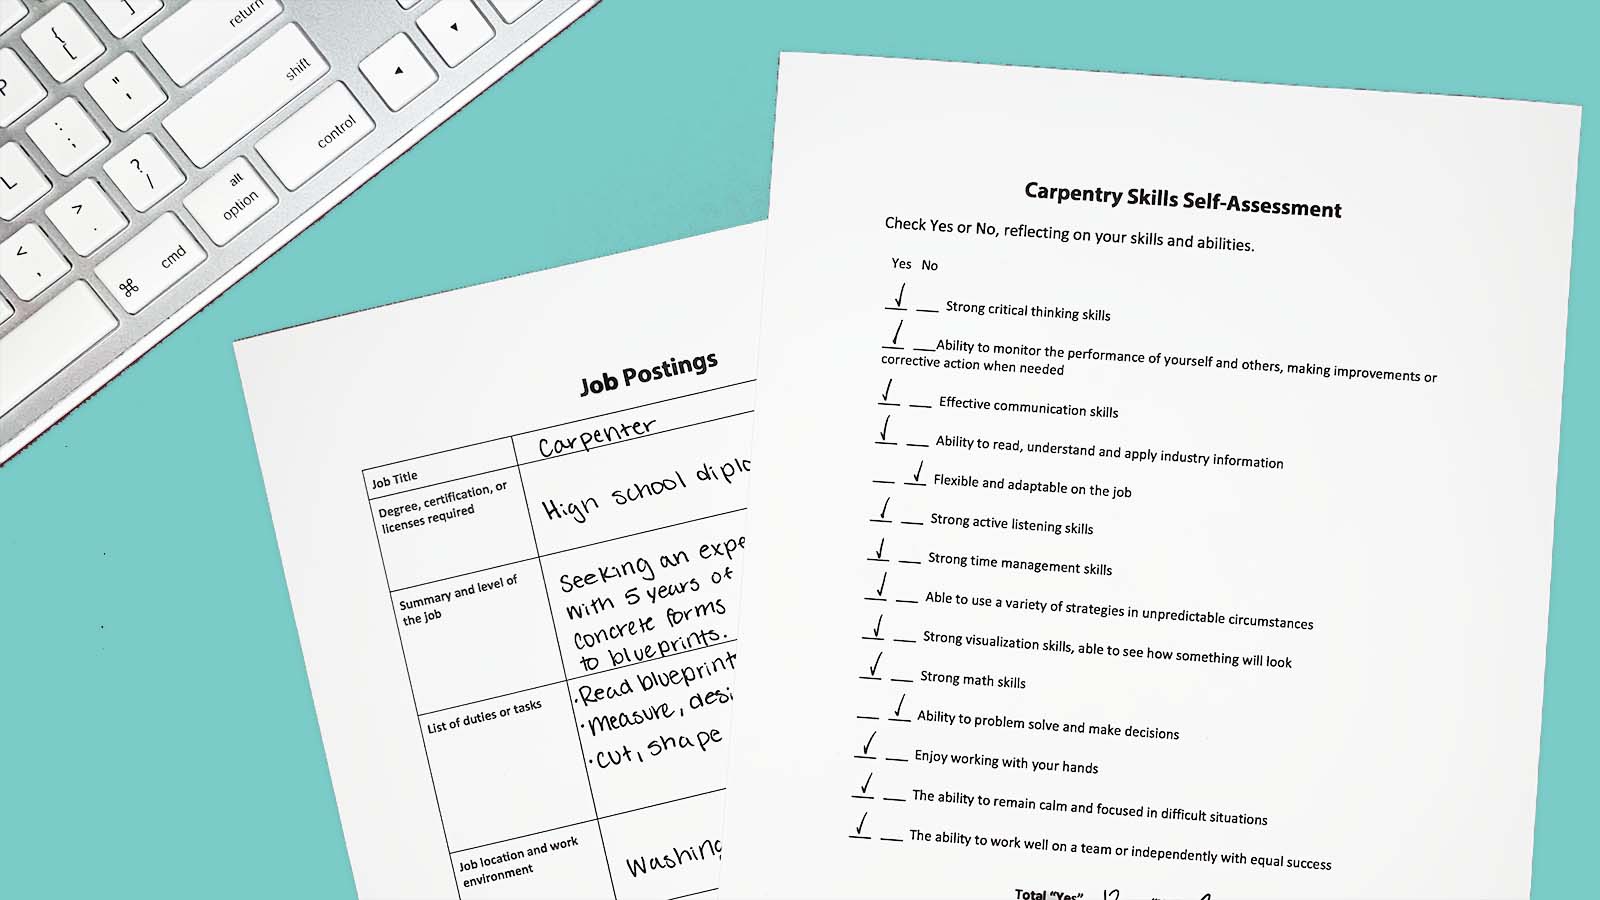 Carpentry printable self assessment and job posting worksheets on desk with keyboard